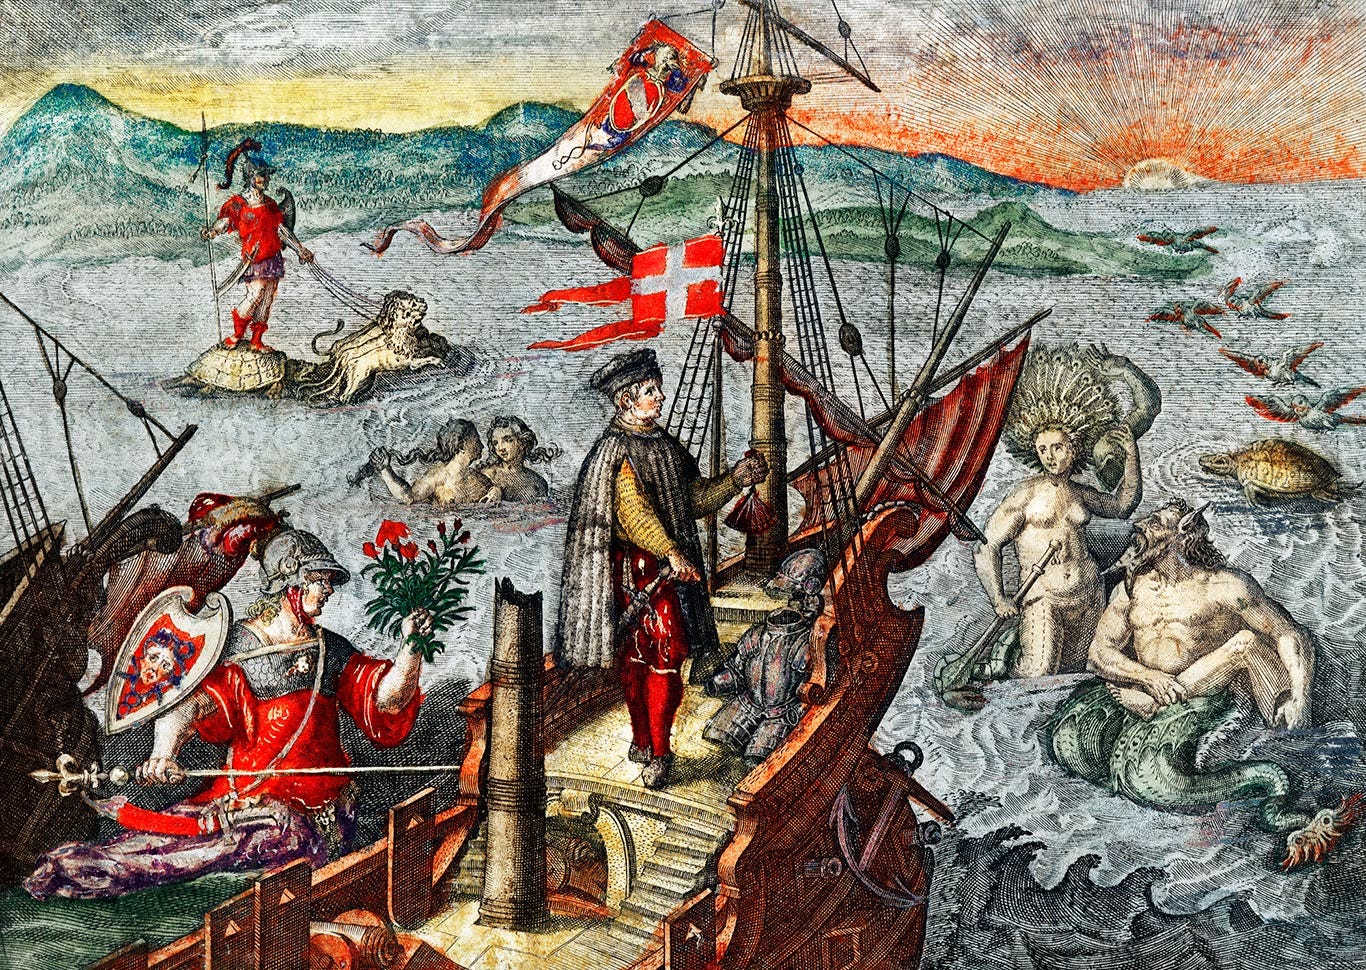 Painting of Christopher Columbus by Theodor de Bry